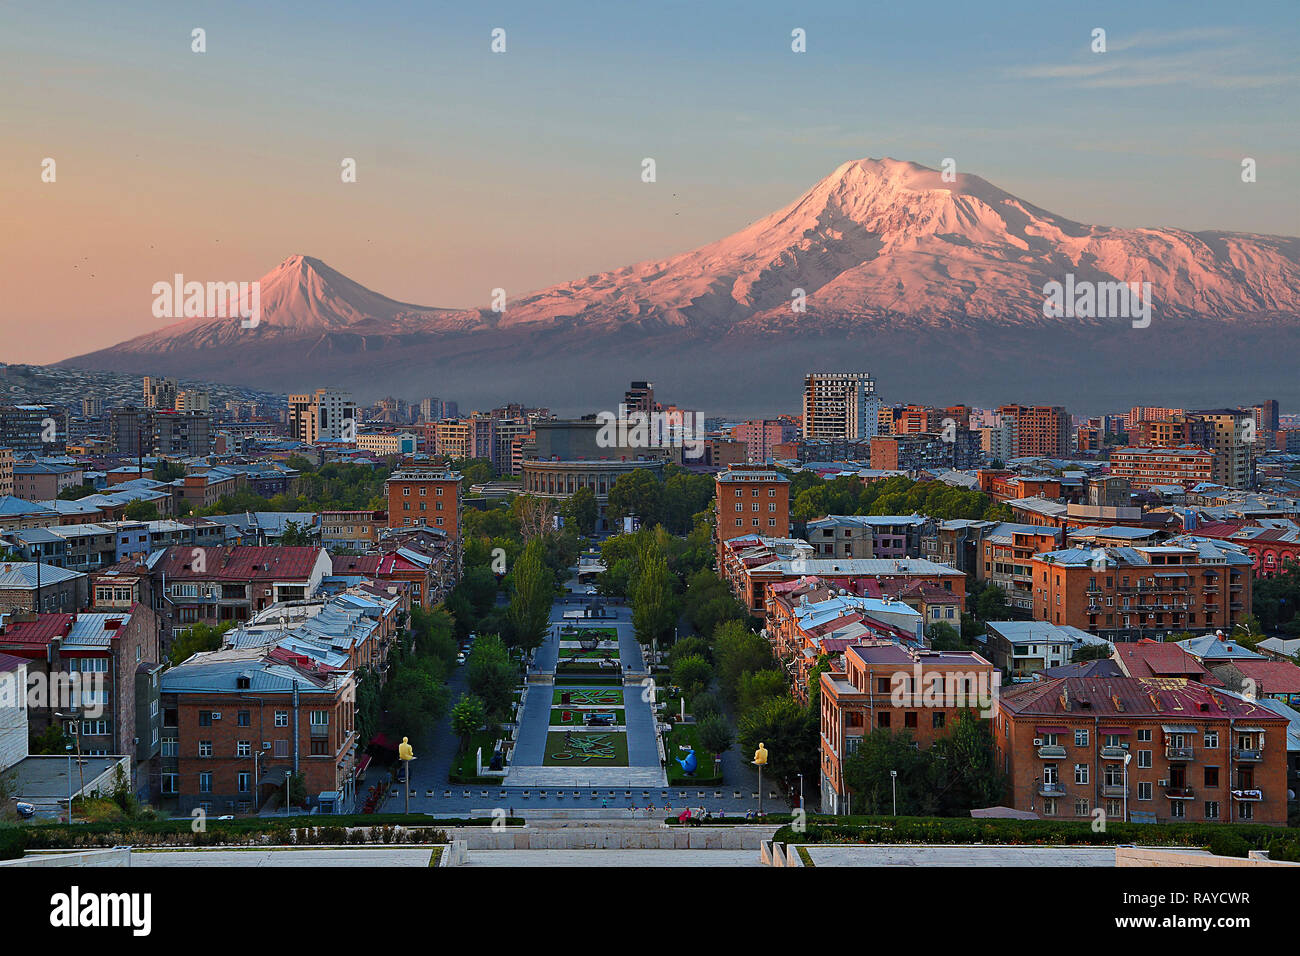 View over the city of Yerevan, capital of Armenia, with the two peaks of the Mount Ararat in the background, at the sunrise Stock Photo